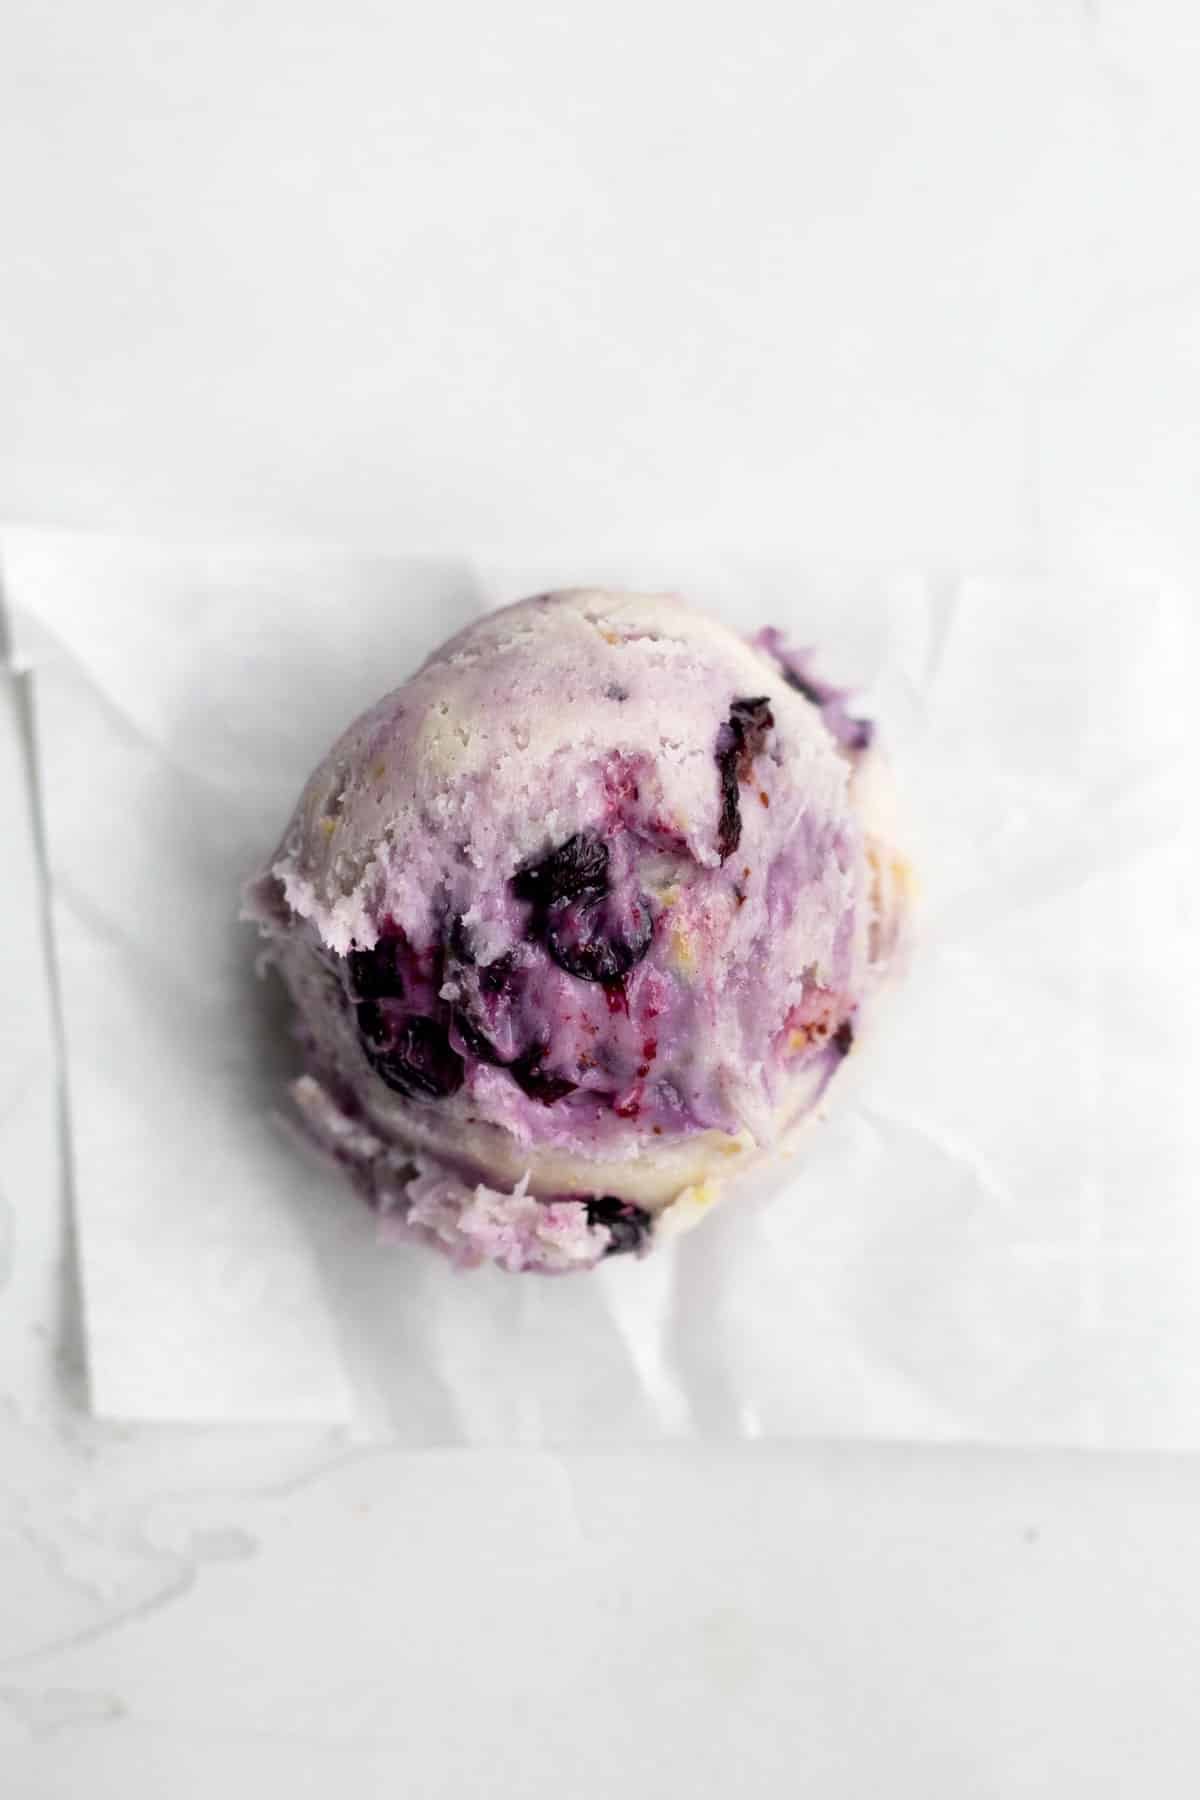 A scooped ball of cookie dough with wild blueberries.